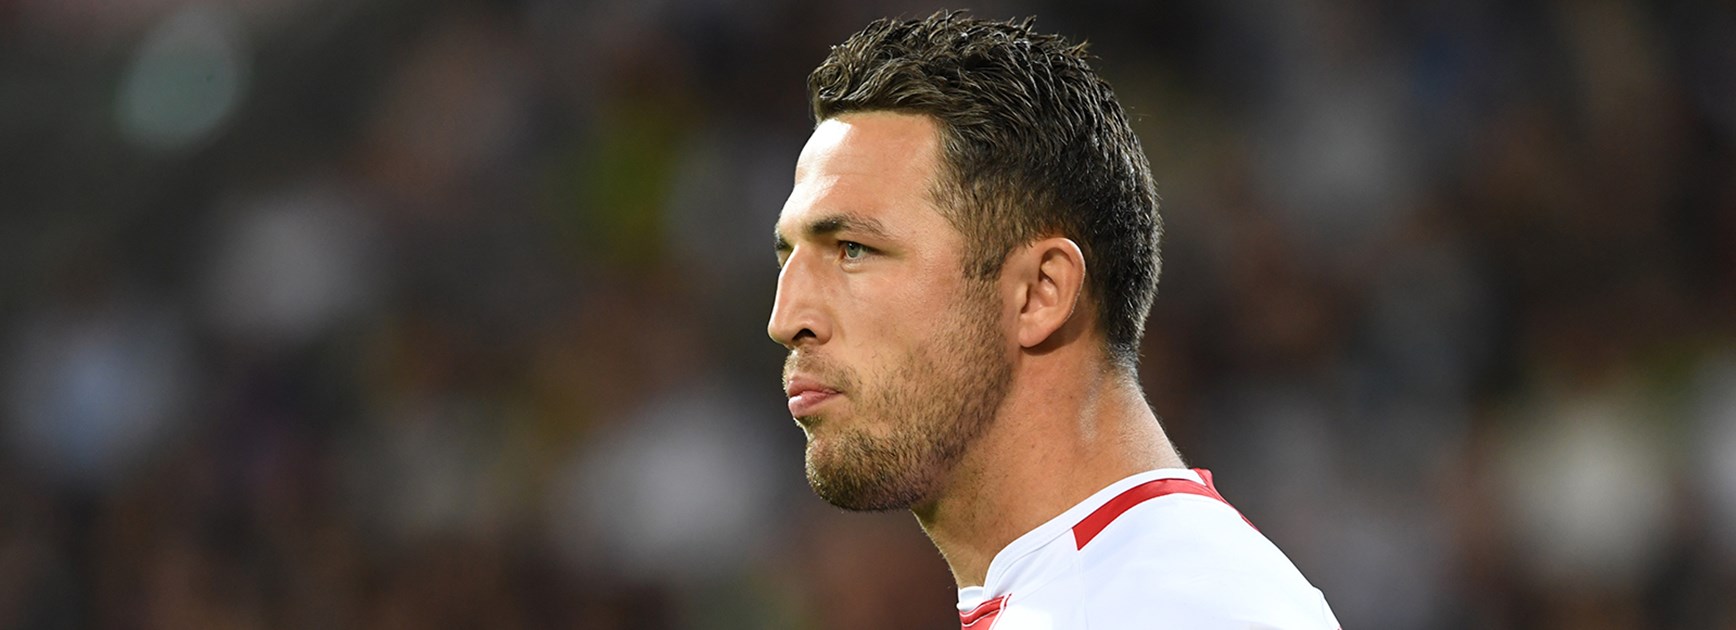 England enforcer Sam Burgess is raring to go for the World Cup quarter-finals, having missed two games with injury.